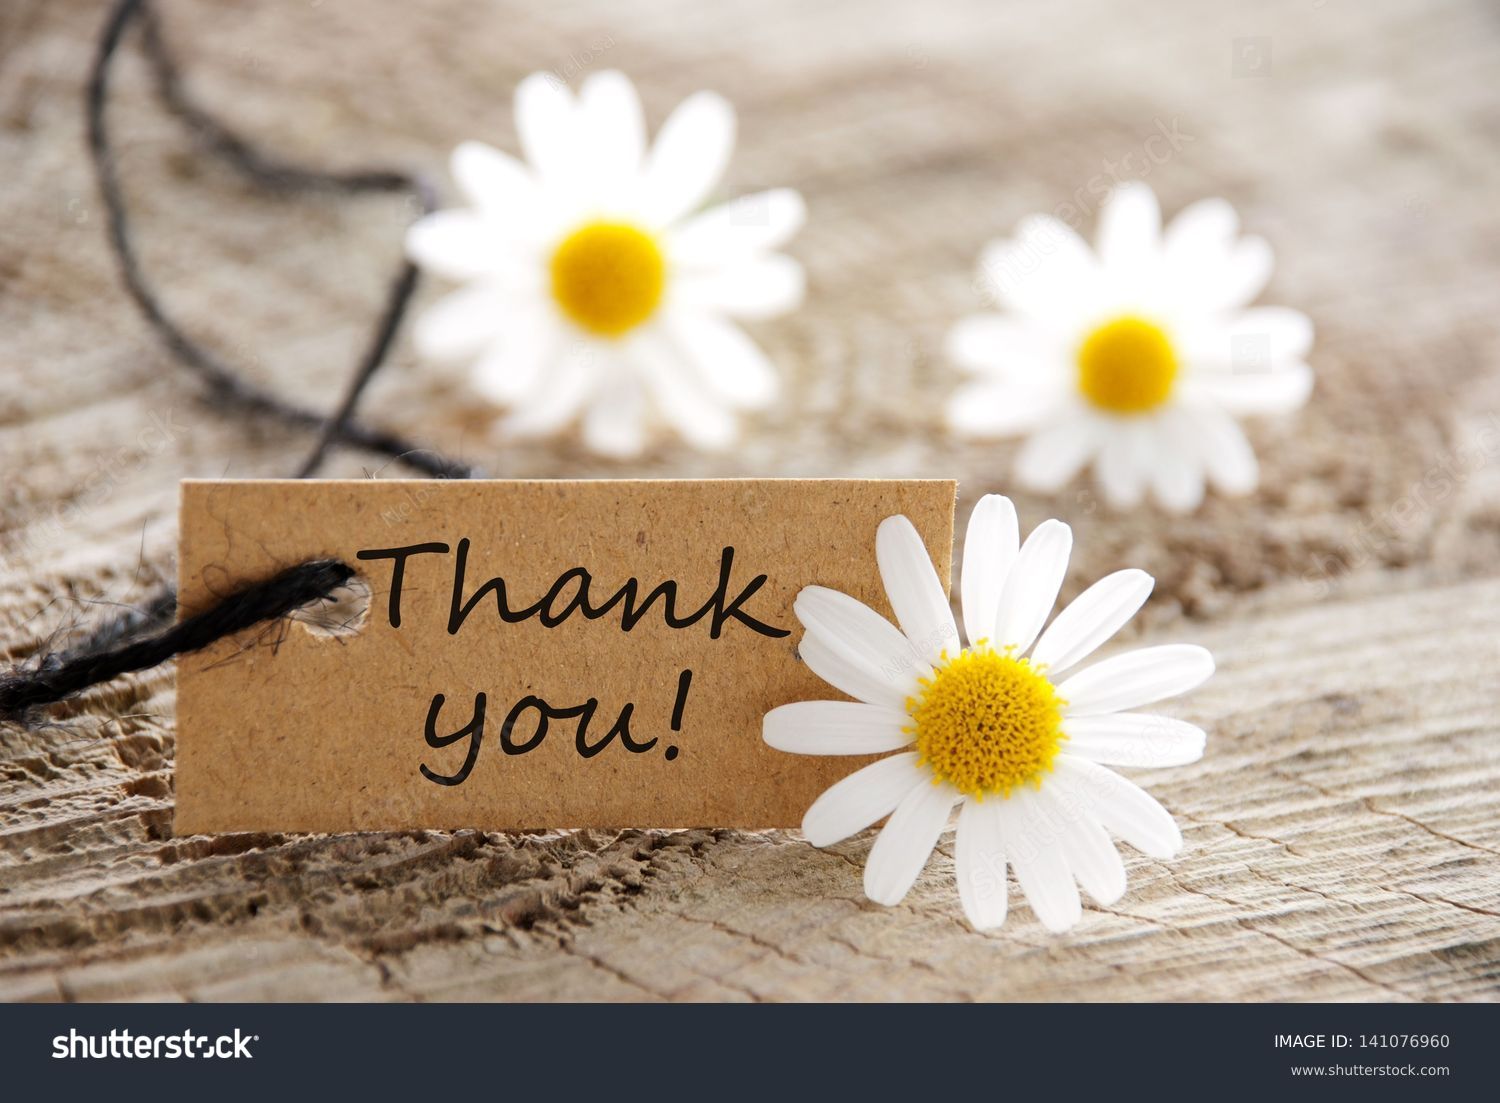 a natural looking banner with thank you and white blossoms as background #141076960